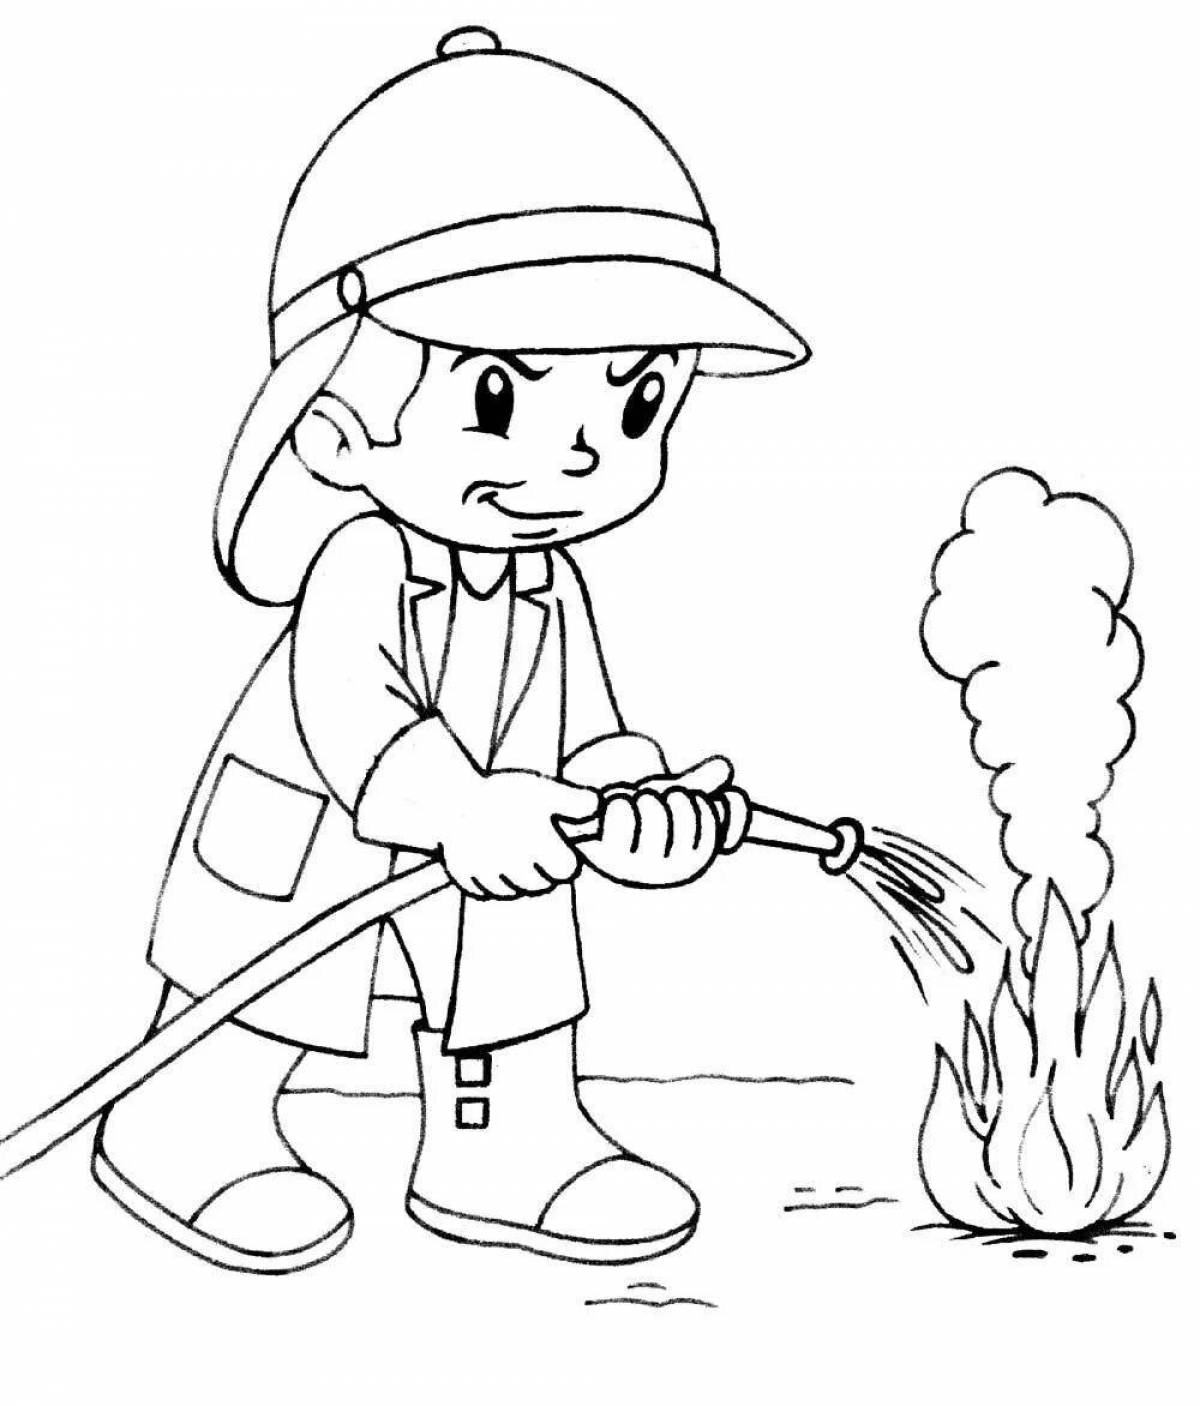 Burning hot fire coloring page